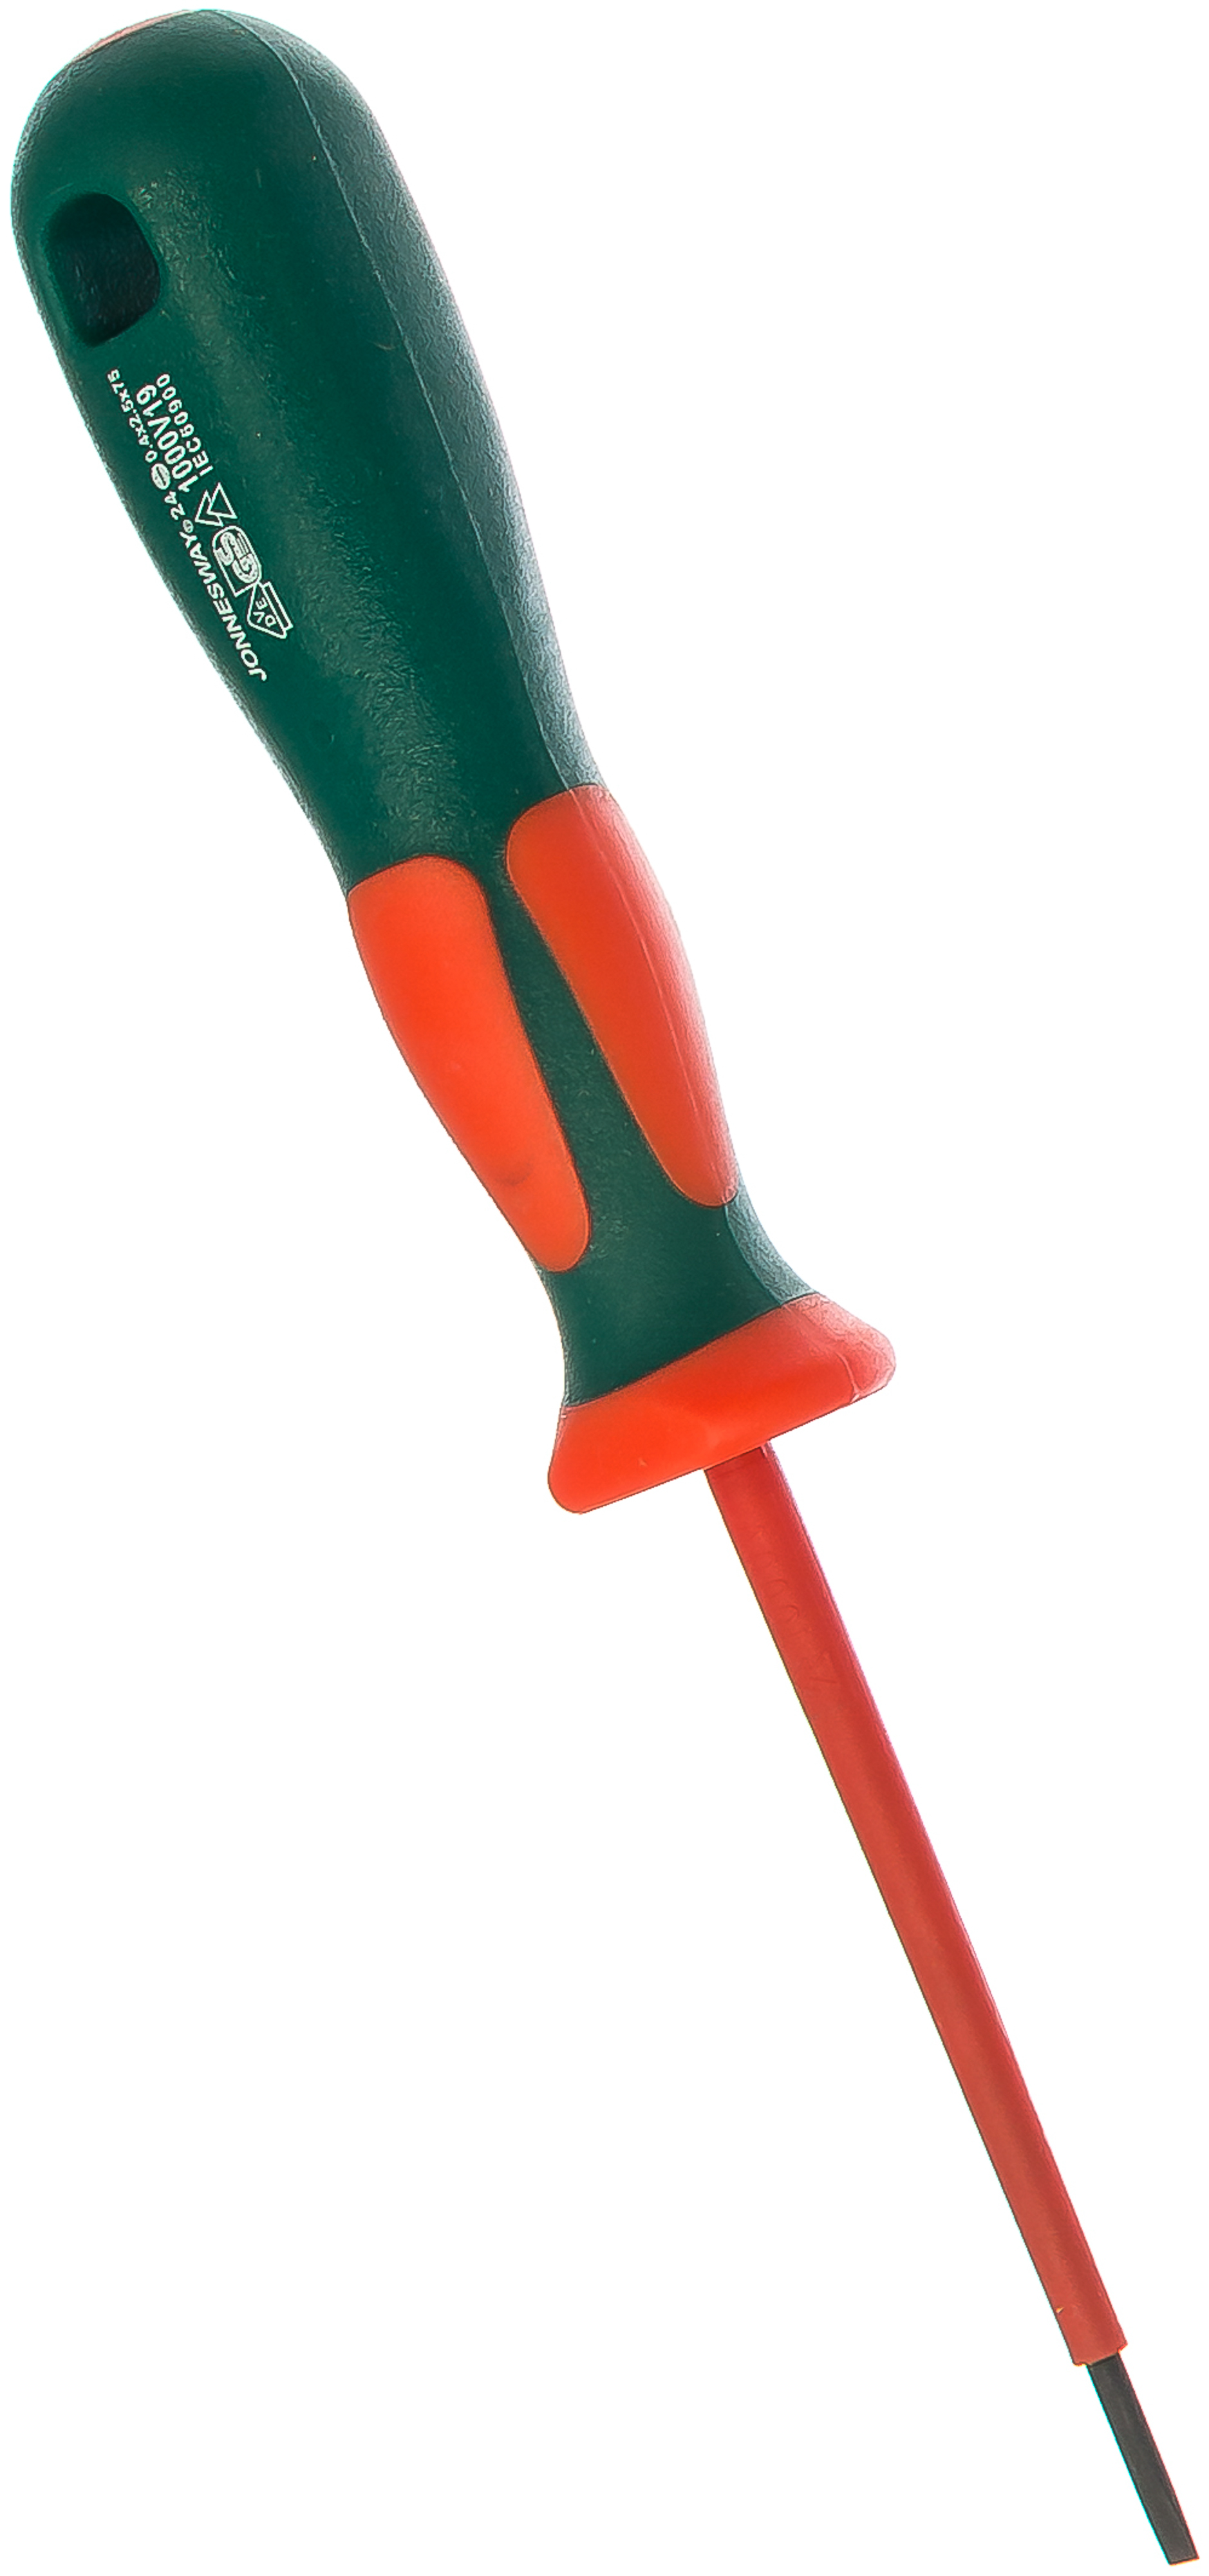 1000V INSULATED SCREWDRIVERS GS&VDE APPROVED 4.0X100MM DV13S4100 - Click Image to Close